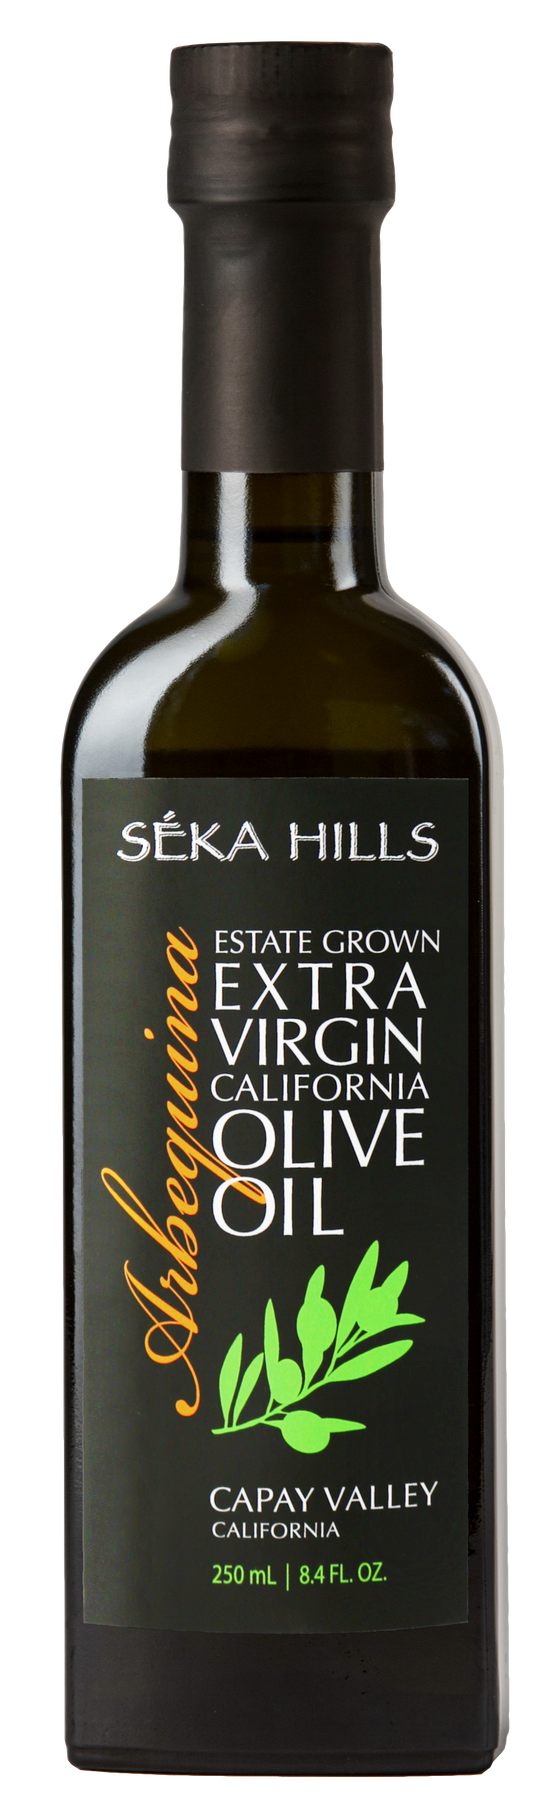 Arbequina Extra Virgin Olive Oil 250ml by Seka Hills